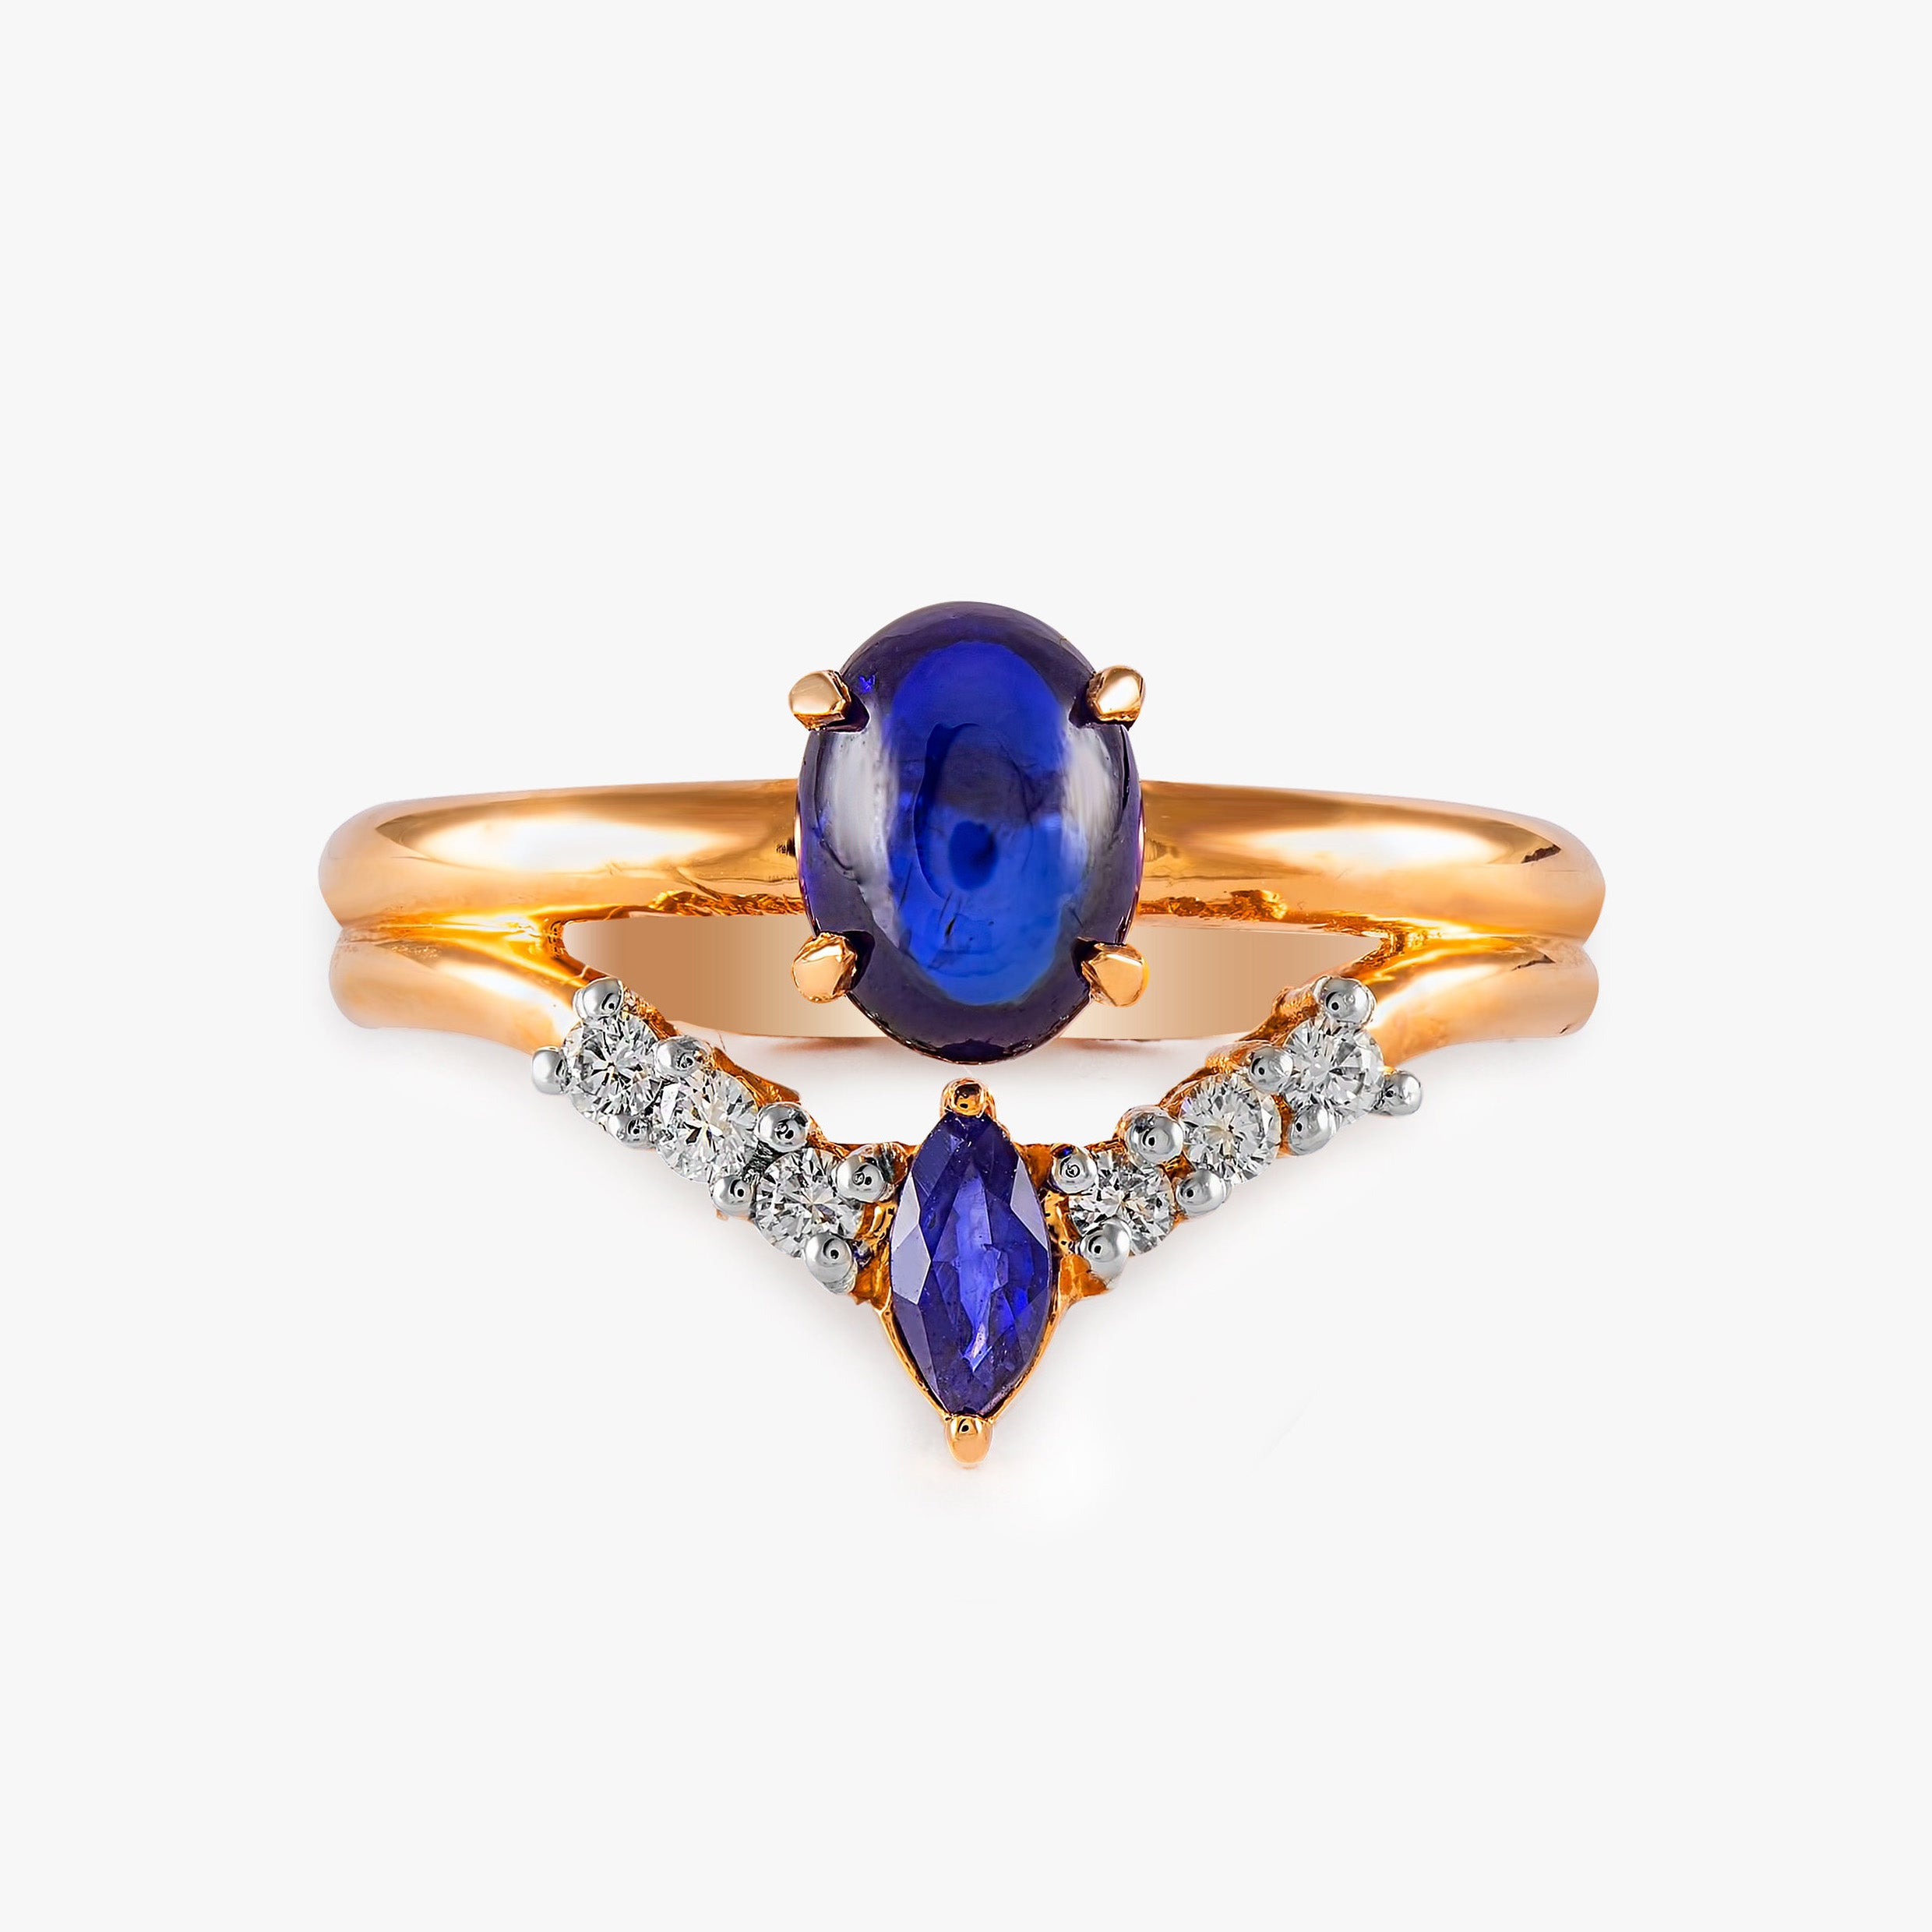 Double Sapphire and Diamond Ring in 14K Gold